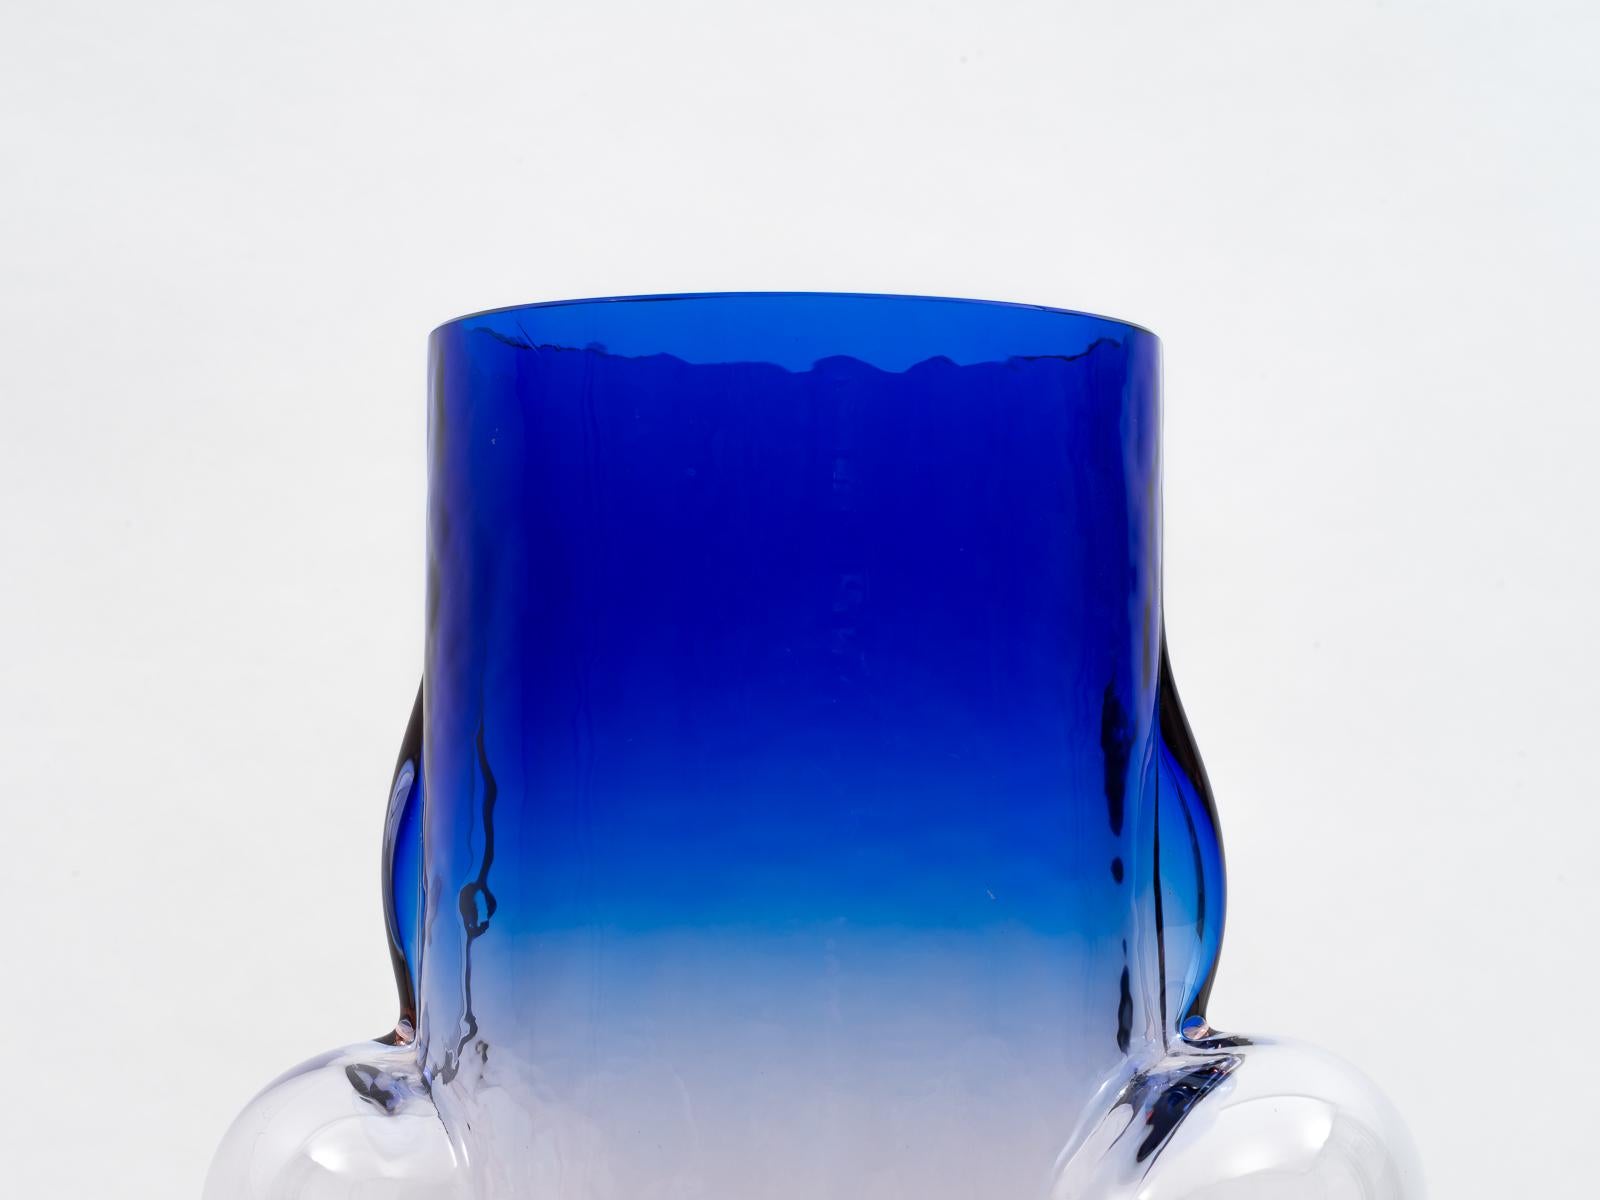 Pink and Blue Blown Glass Organic Vase by Toni Zuccheri for VeArt, 1988 For Sale 3